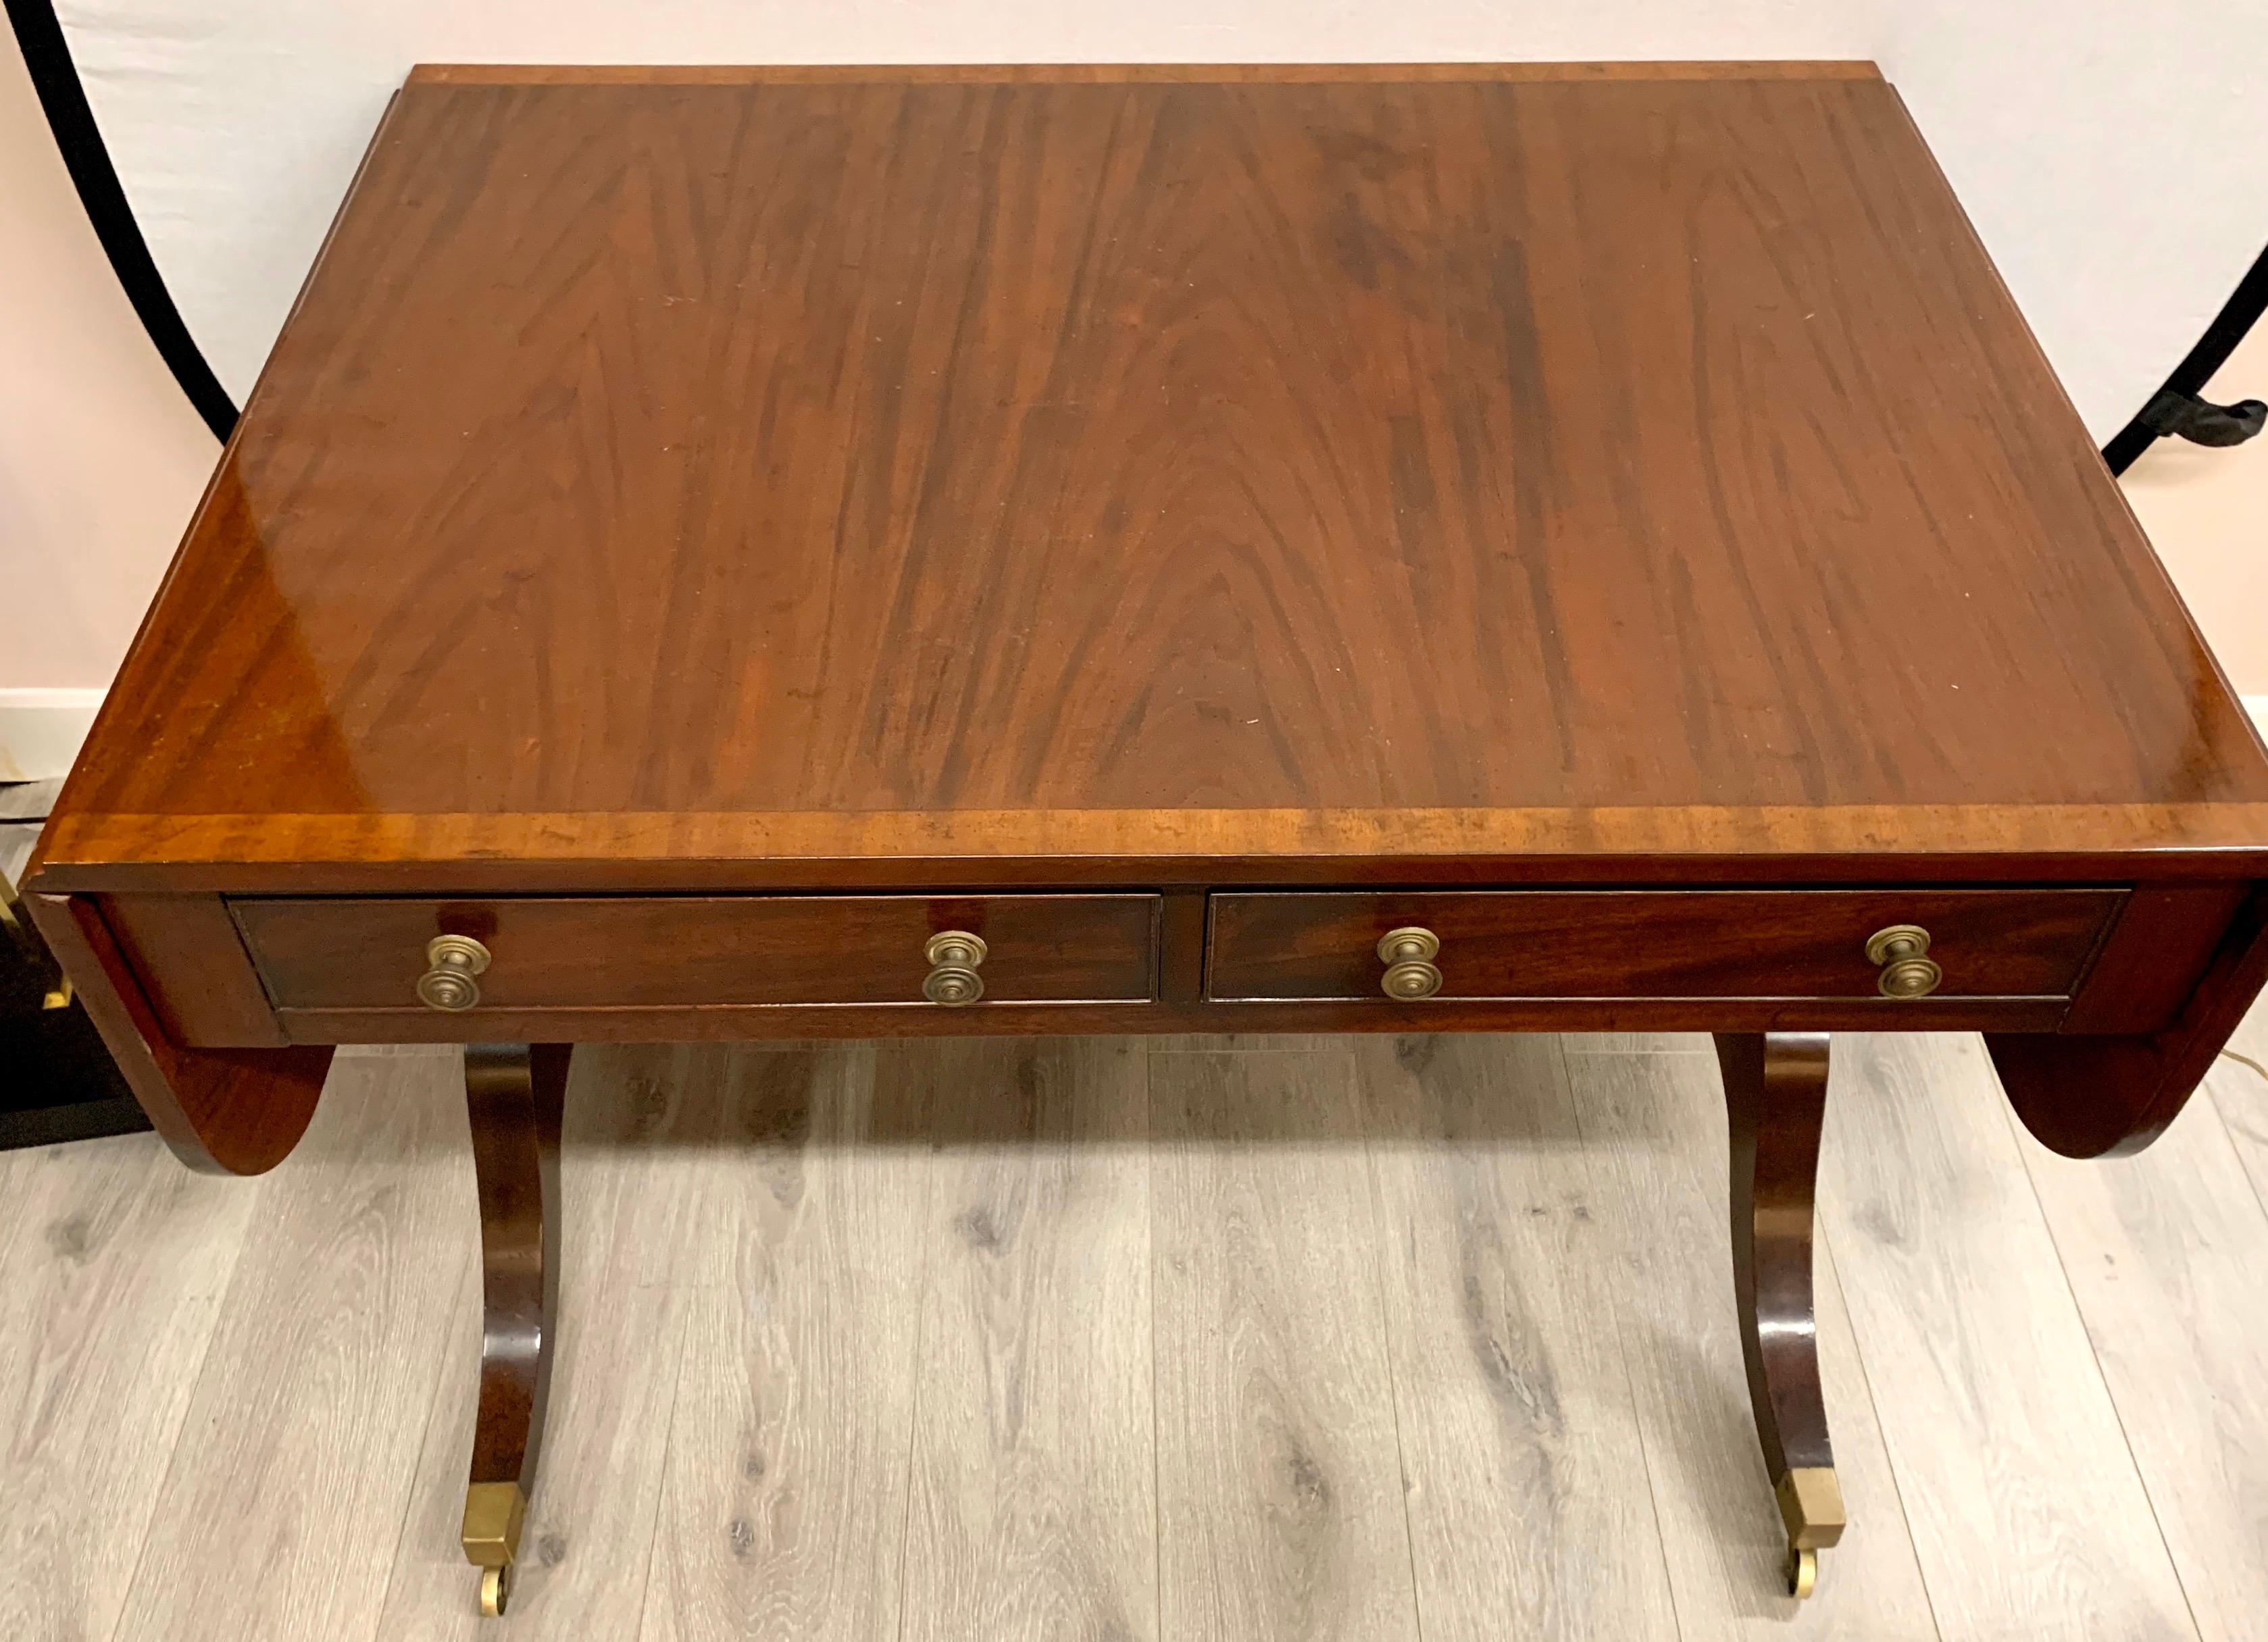 Elegant double pedestal mahogany console table featuring satinwood inlay on top with brass hardware and brass castors. Features two drawers in front with two faux drawers in back. Very versatile piece can also be used as a writing desk.
Measures: 60